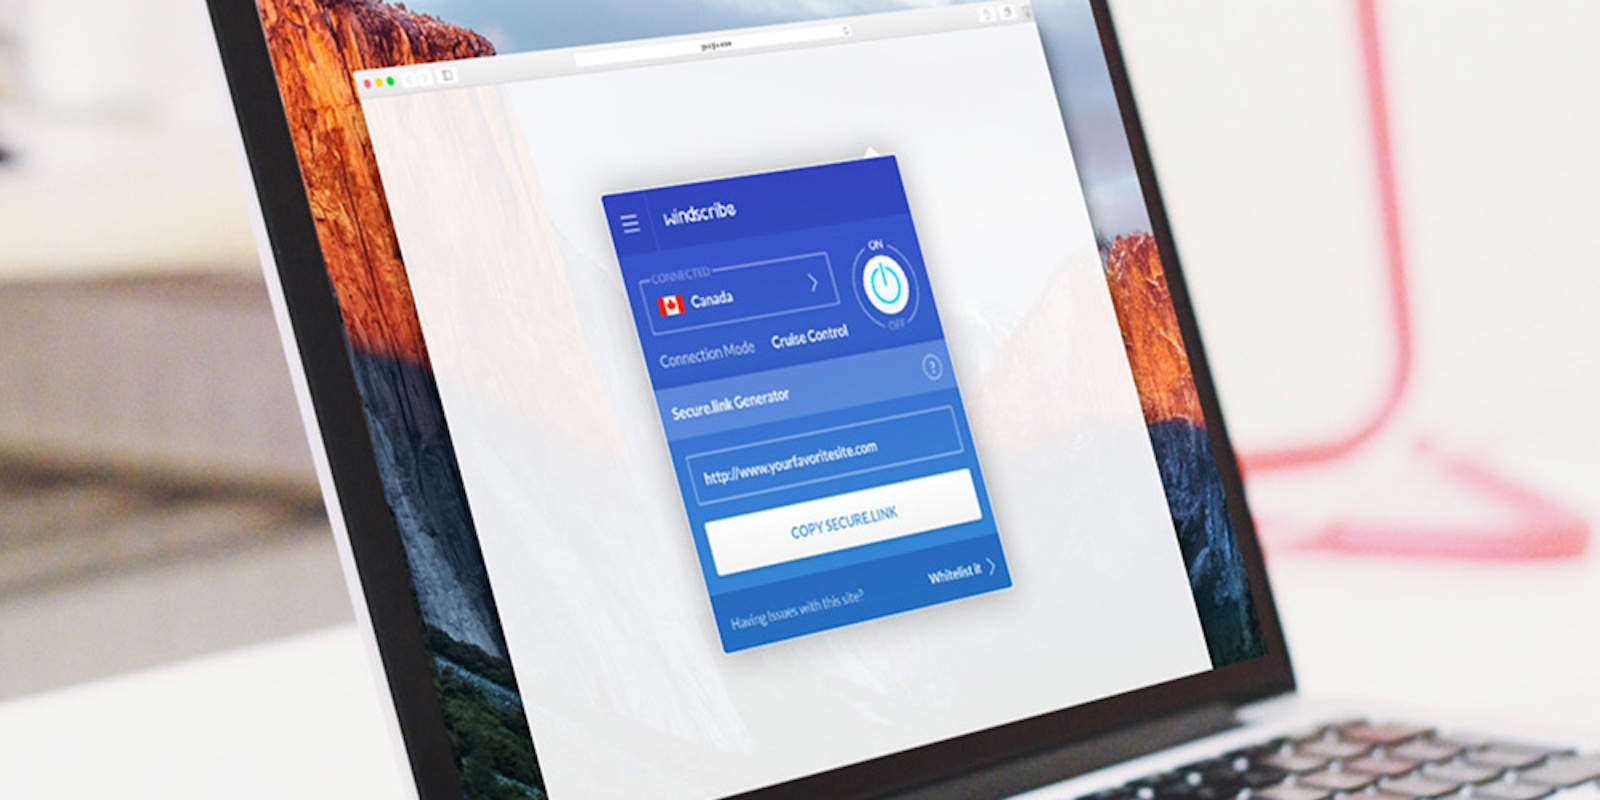 Protect your browsing and bypass restrictions with a convenient and effective VPN